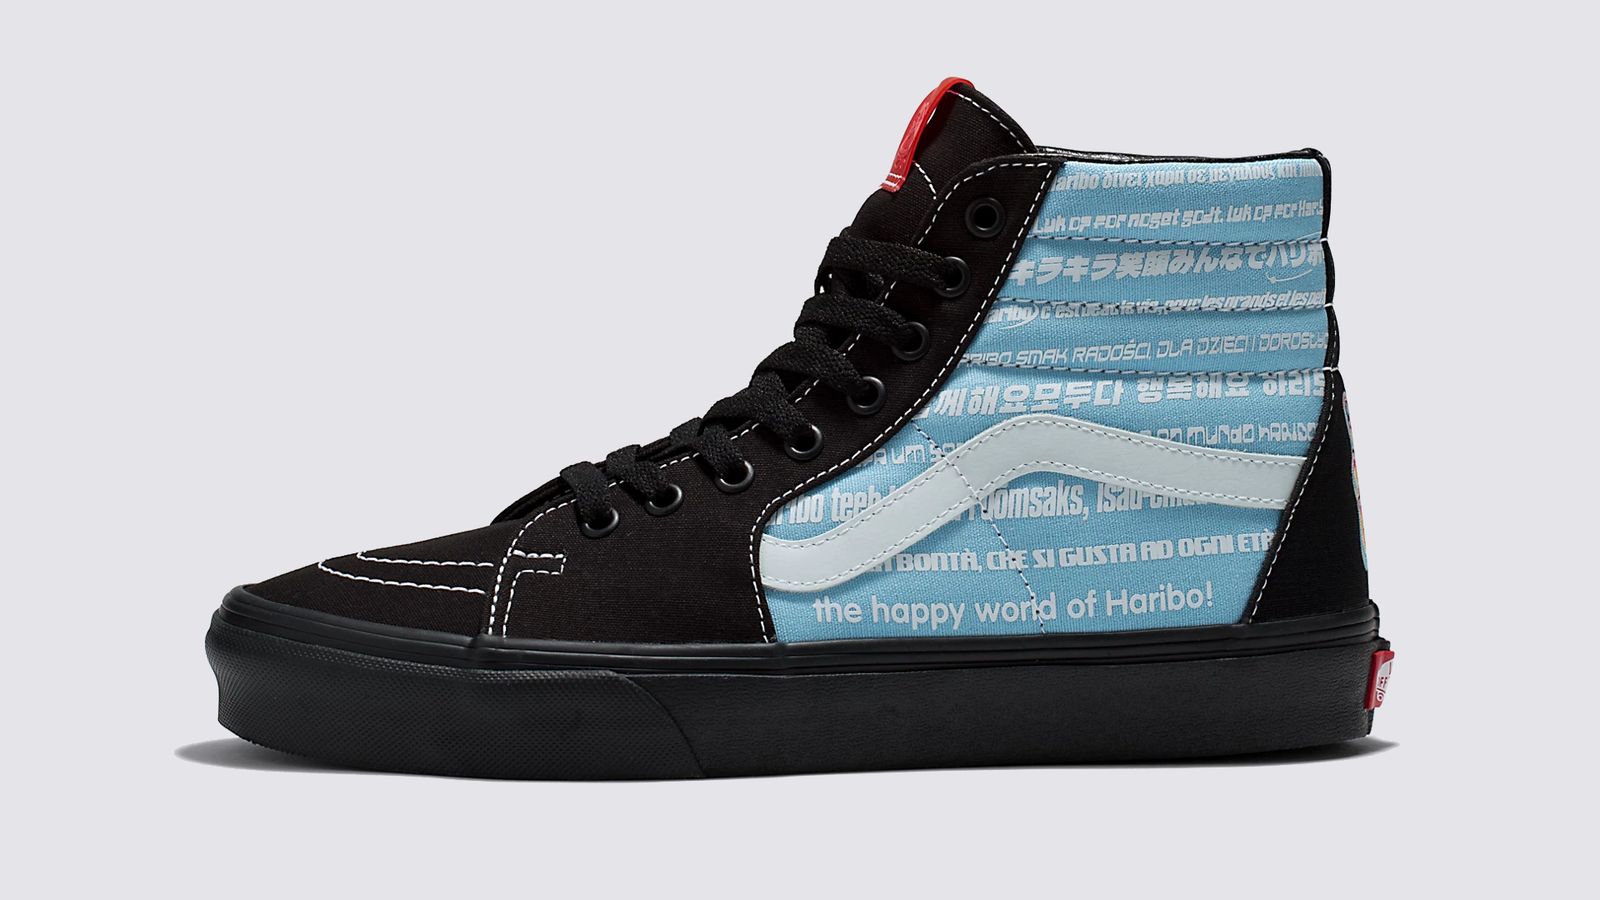 Haribo x Vans Sk8-Hi "Haribo Black" product image of a black high-top with a light blue collar and side teamed with white accents and writing.